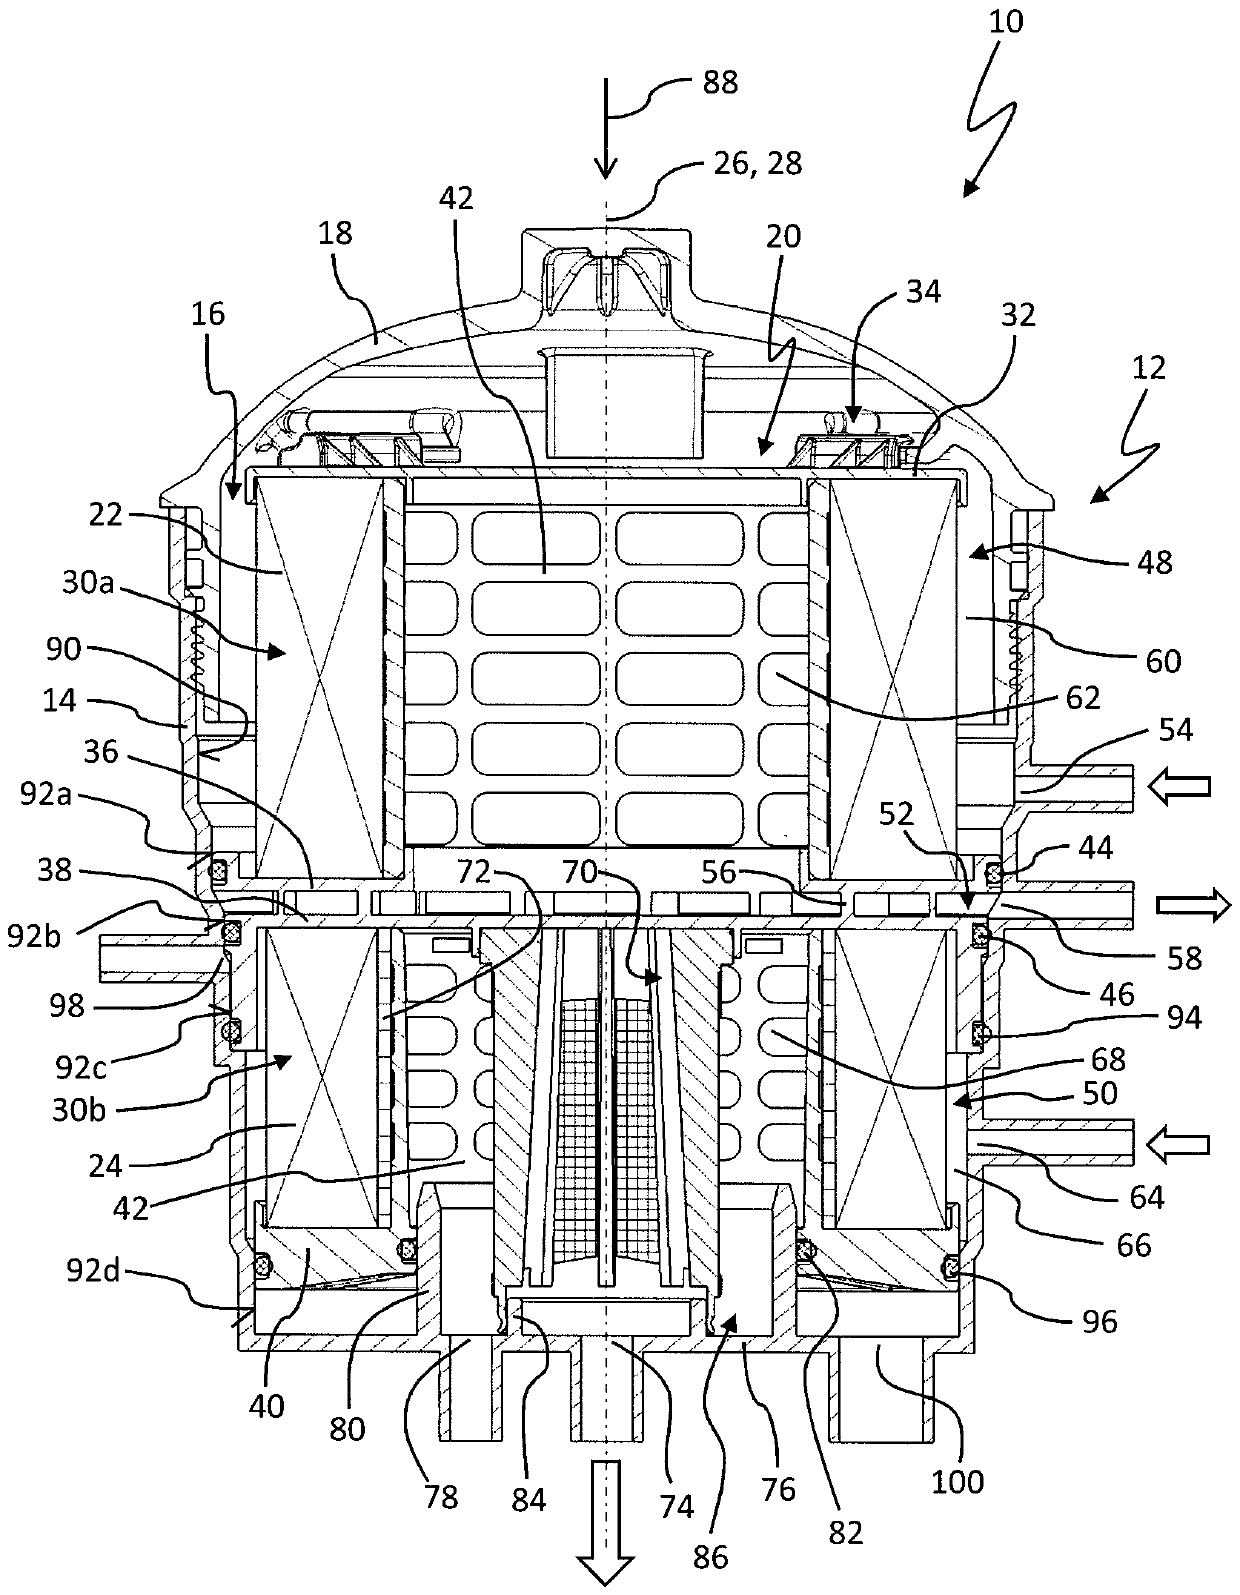 Fuel filter comprising a filter insert with a prefilter element and a main filter element